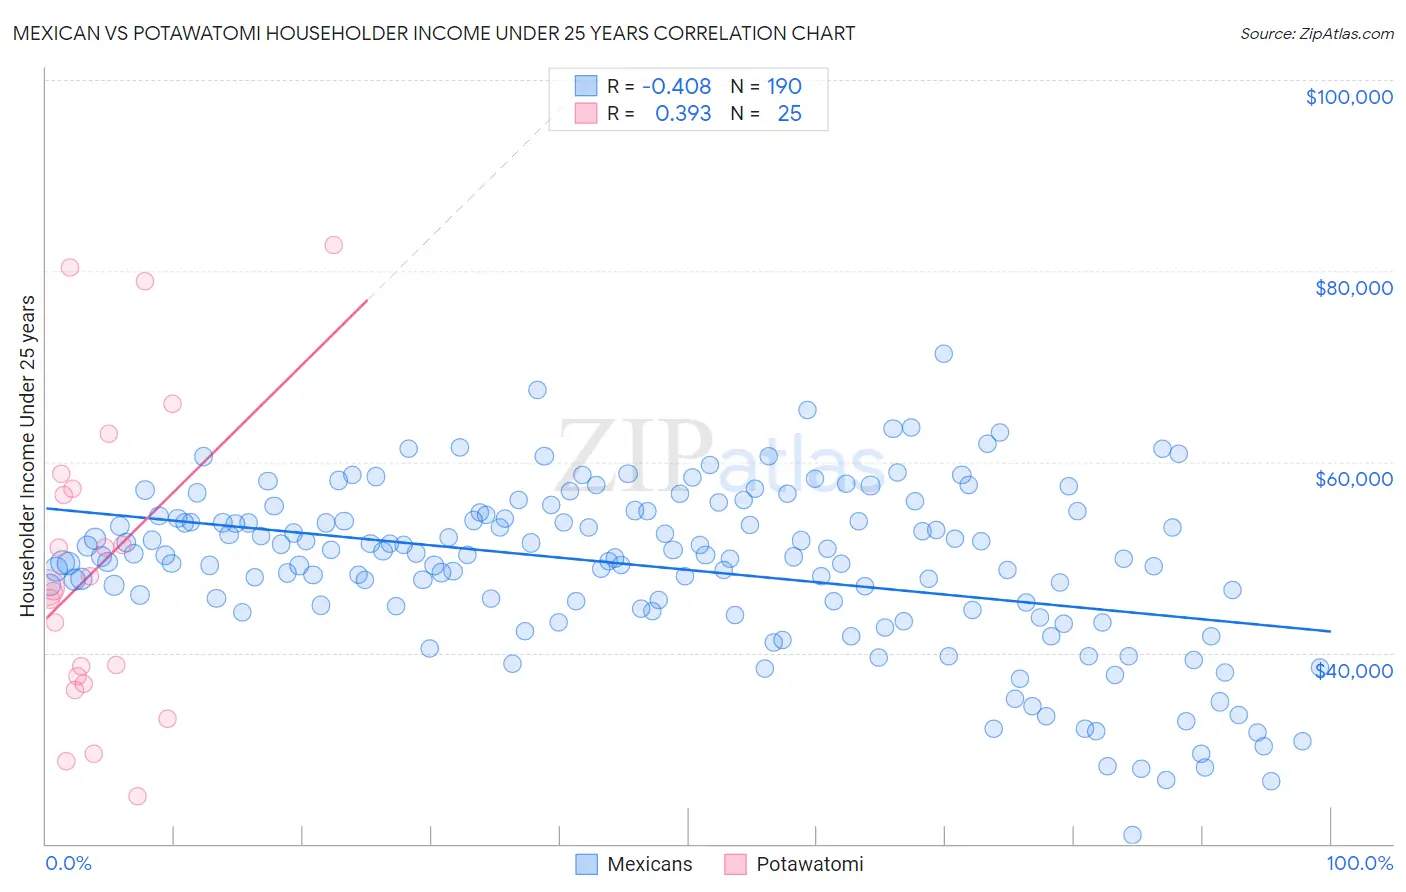 Mexican vs Potawatomi Householder Income Under 25 years